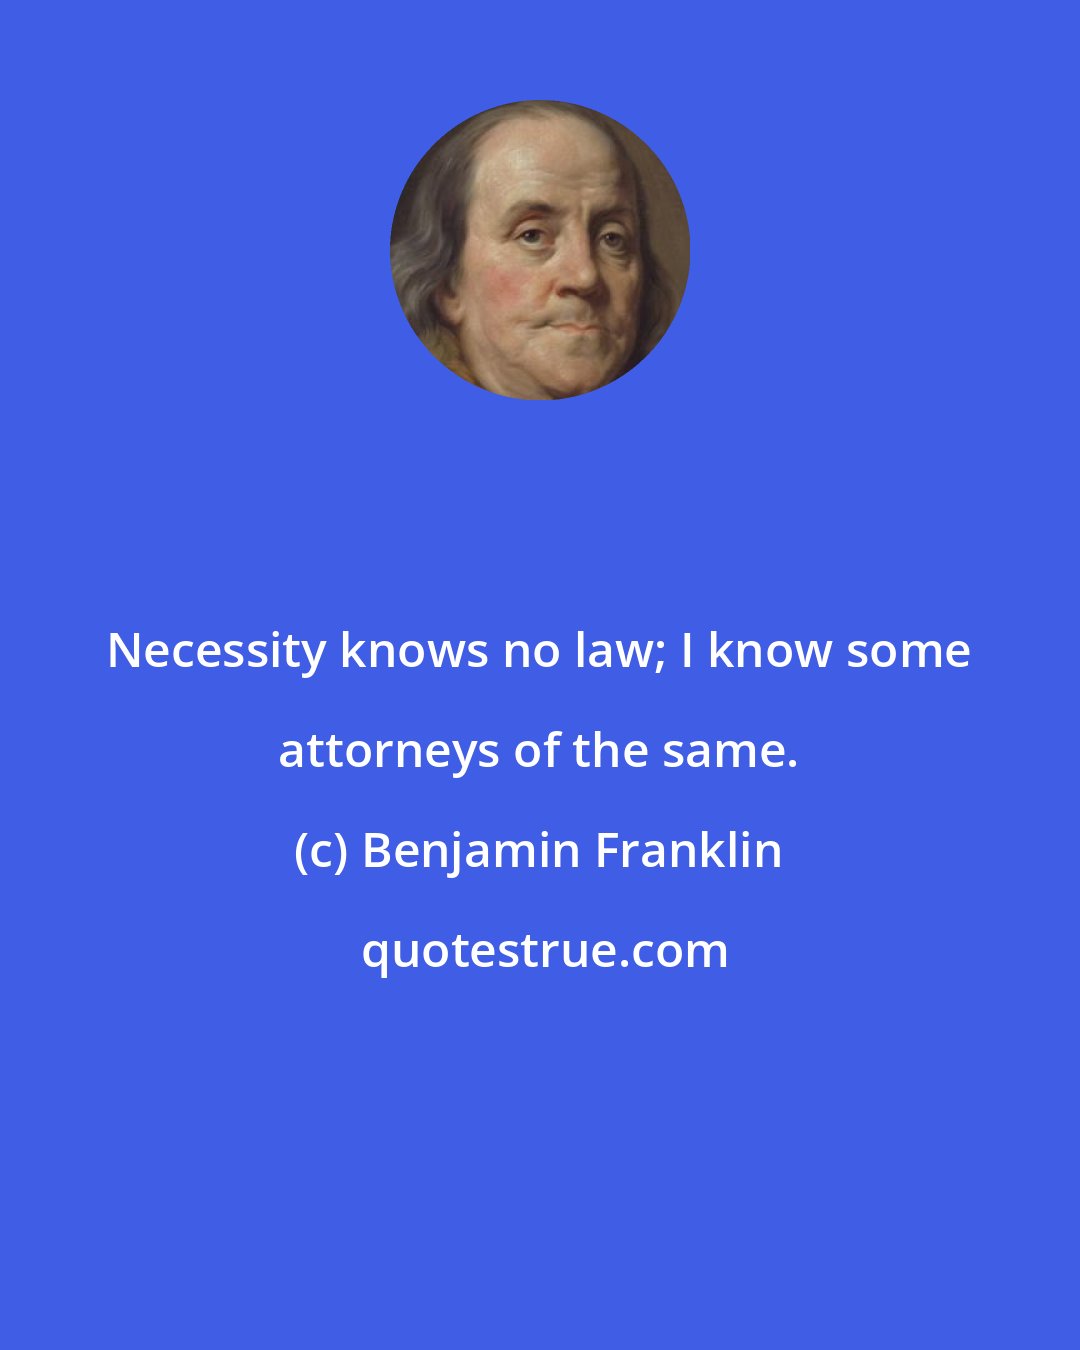 Benjamin Franklin: Necessity knows no law; I know some attorneys of the same.